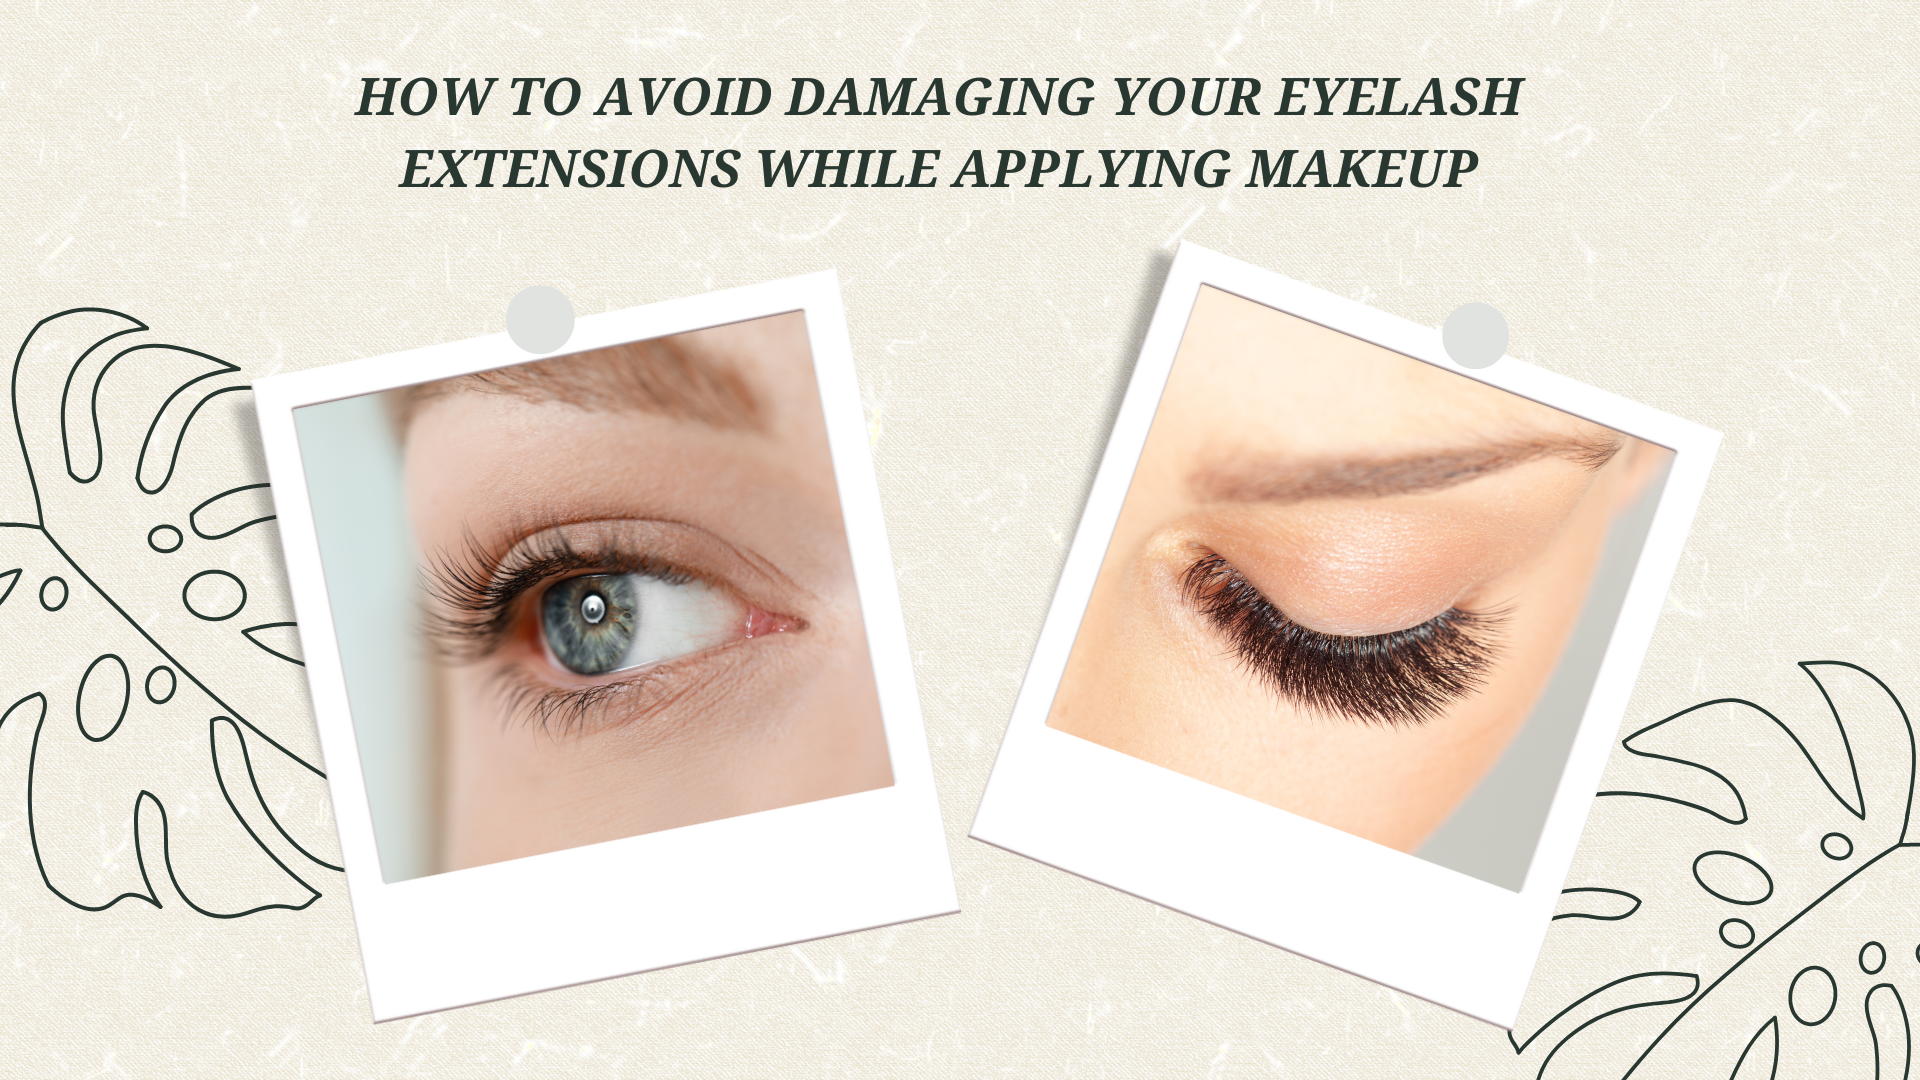 How to avoid damaging your eyelash extensions while applying makeup